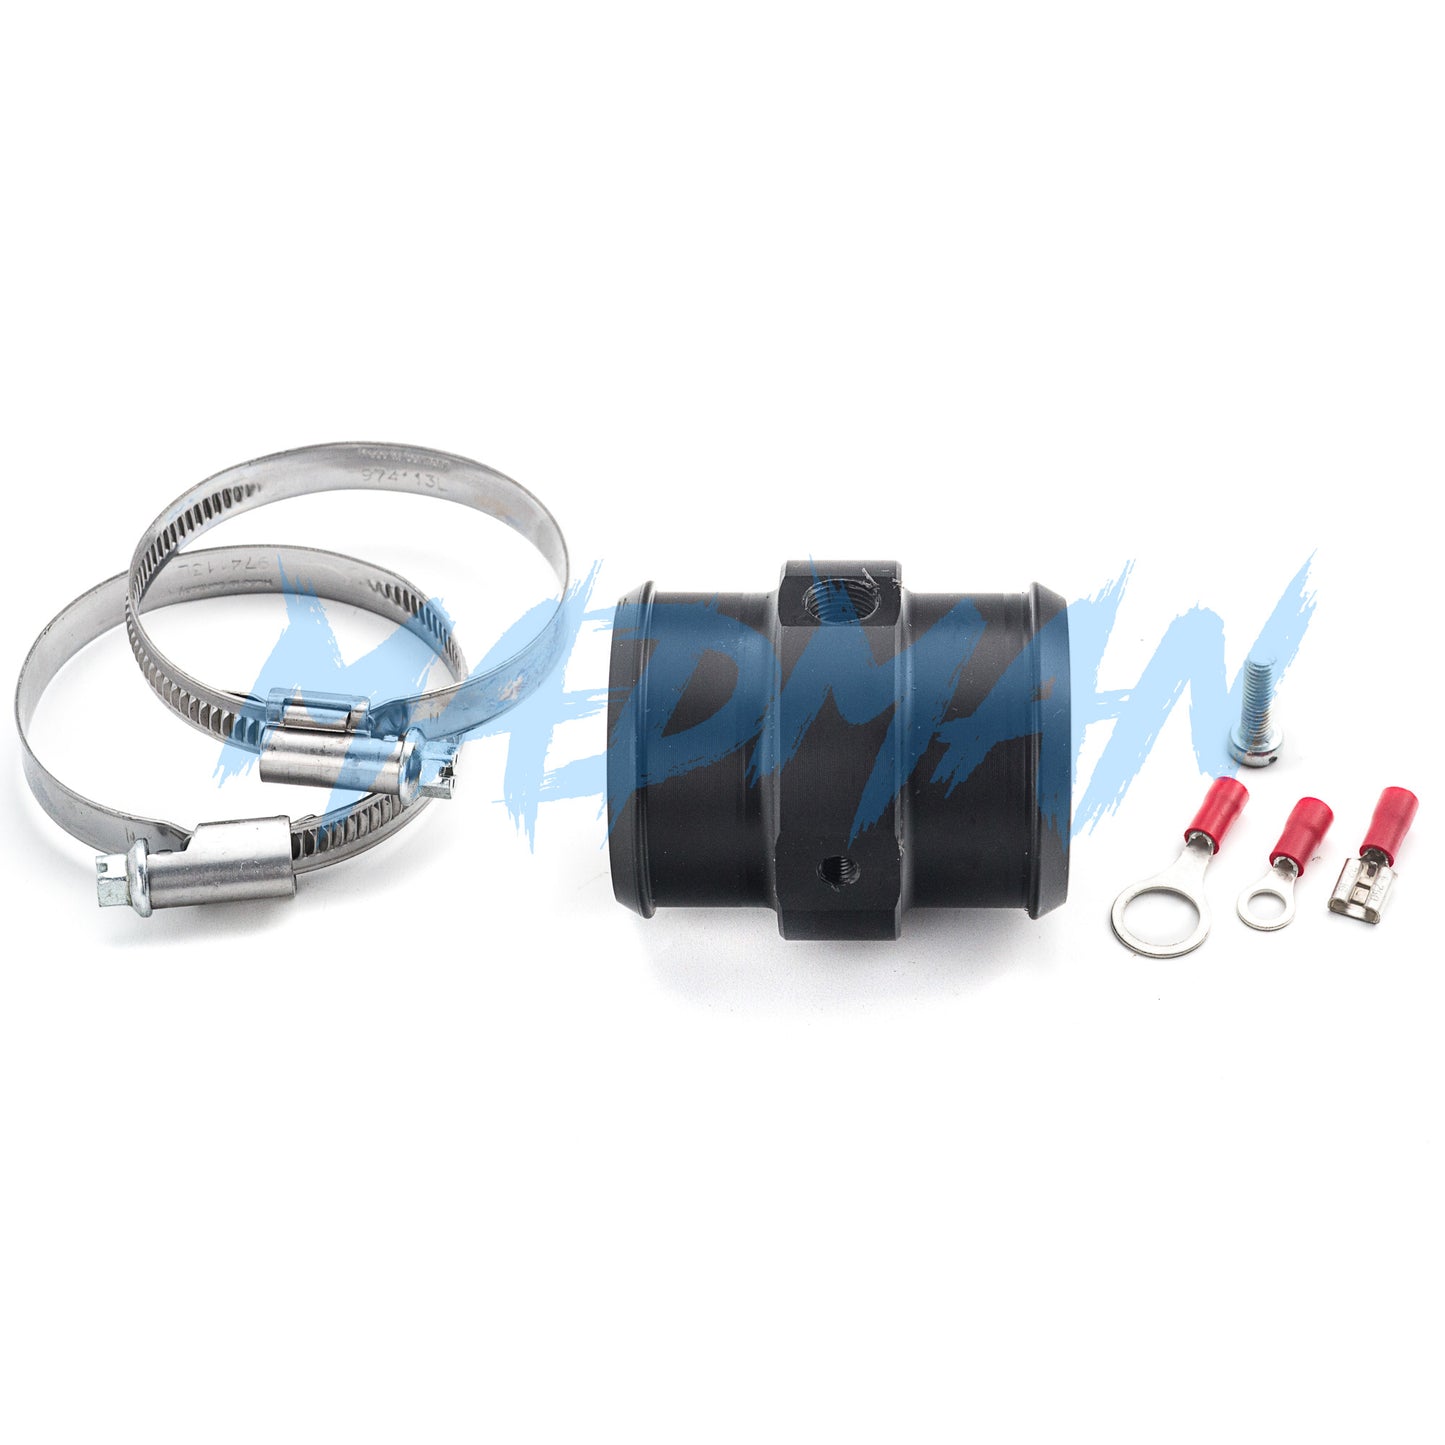 42mm (1.65") Coolant Hose Adapter